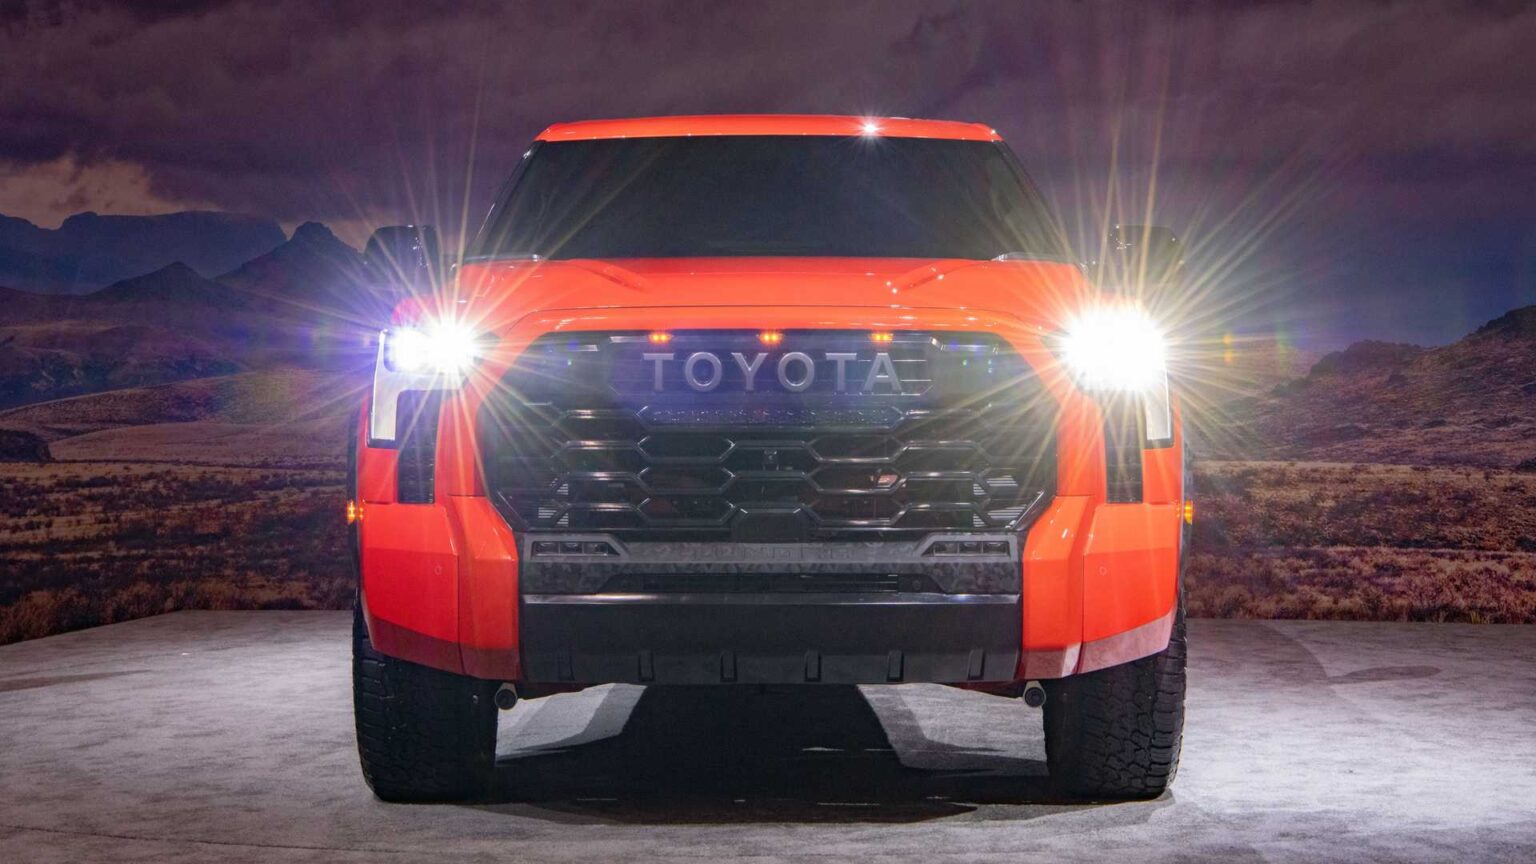 2022-toyota-tundra-trd-pro-exterior-front-view-1536x864.jpg